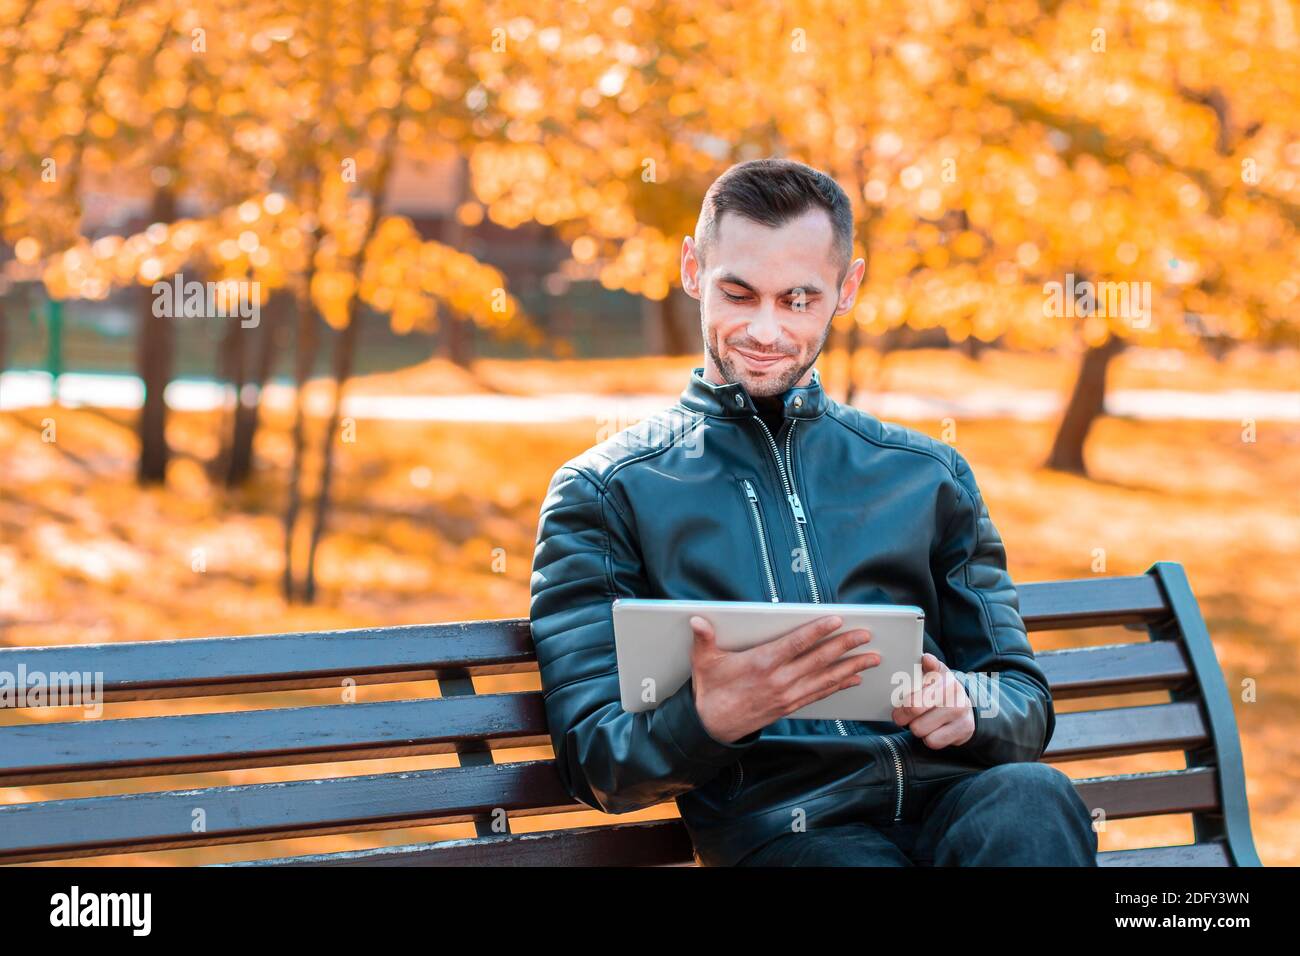 Handsome Young Man Sitting on the Bench and Using Big White Tablet PC at the Beautiful Autumn Park Stock Photo